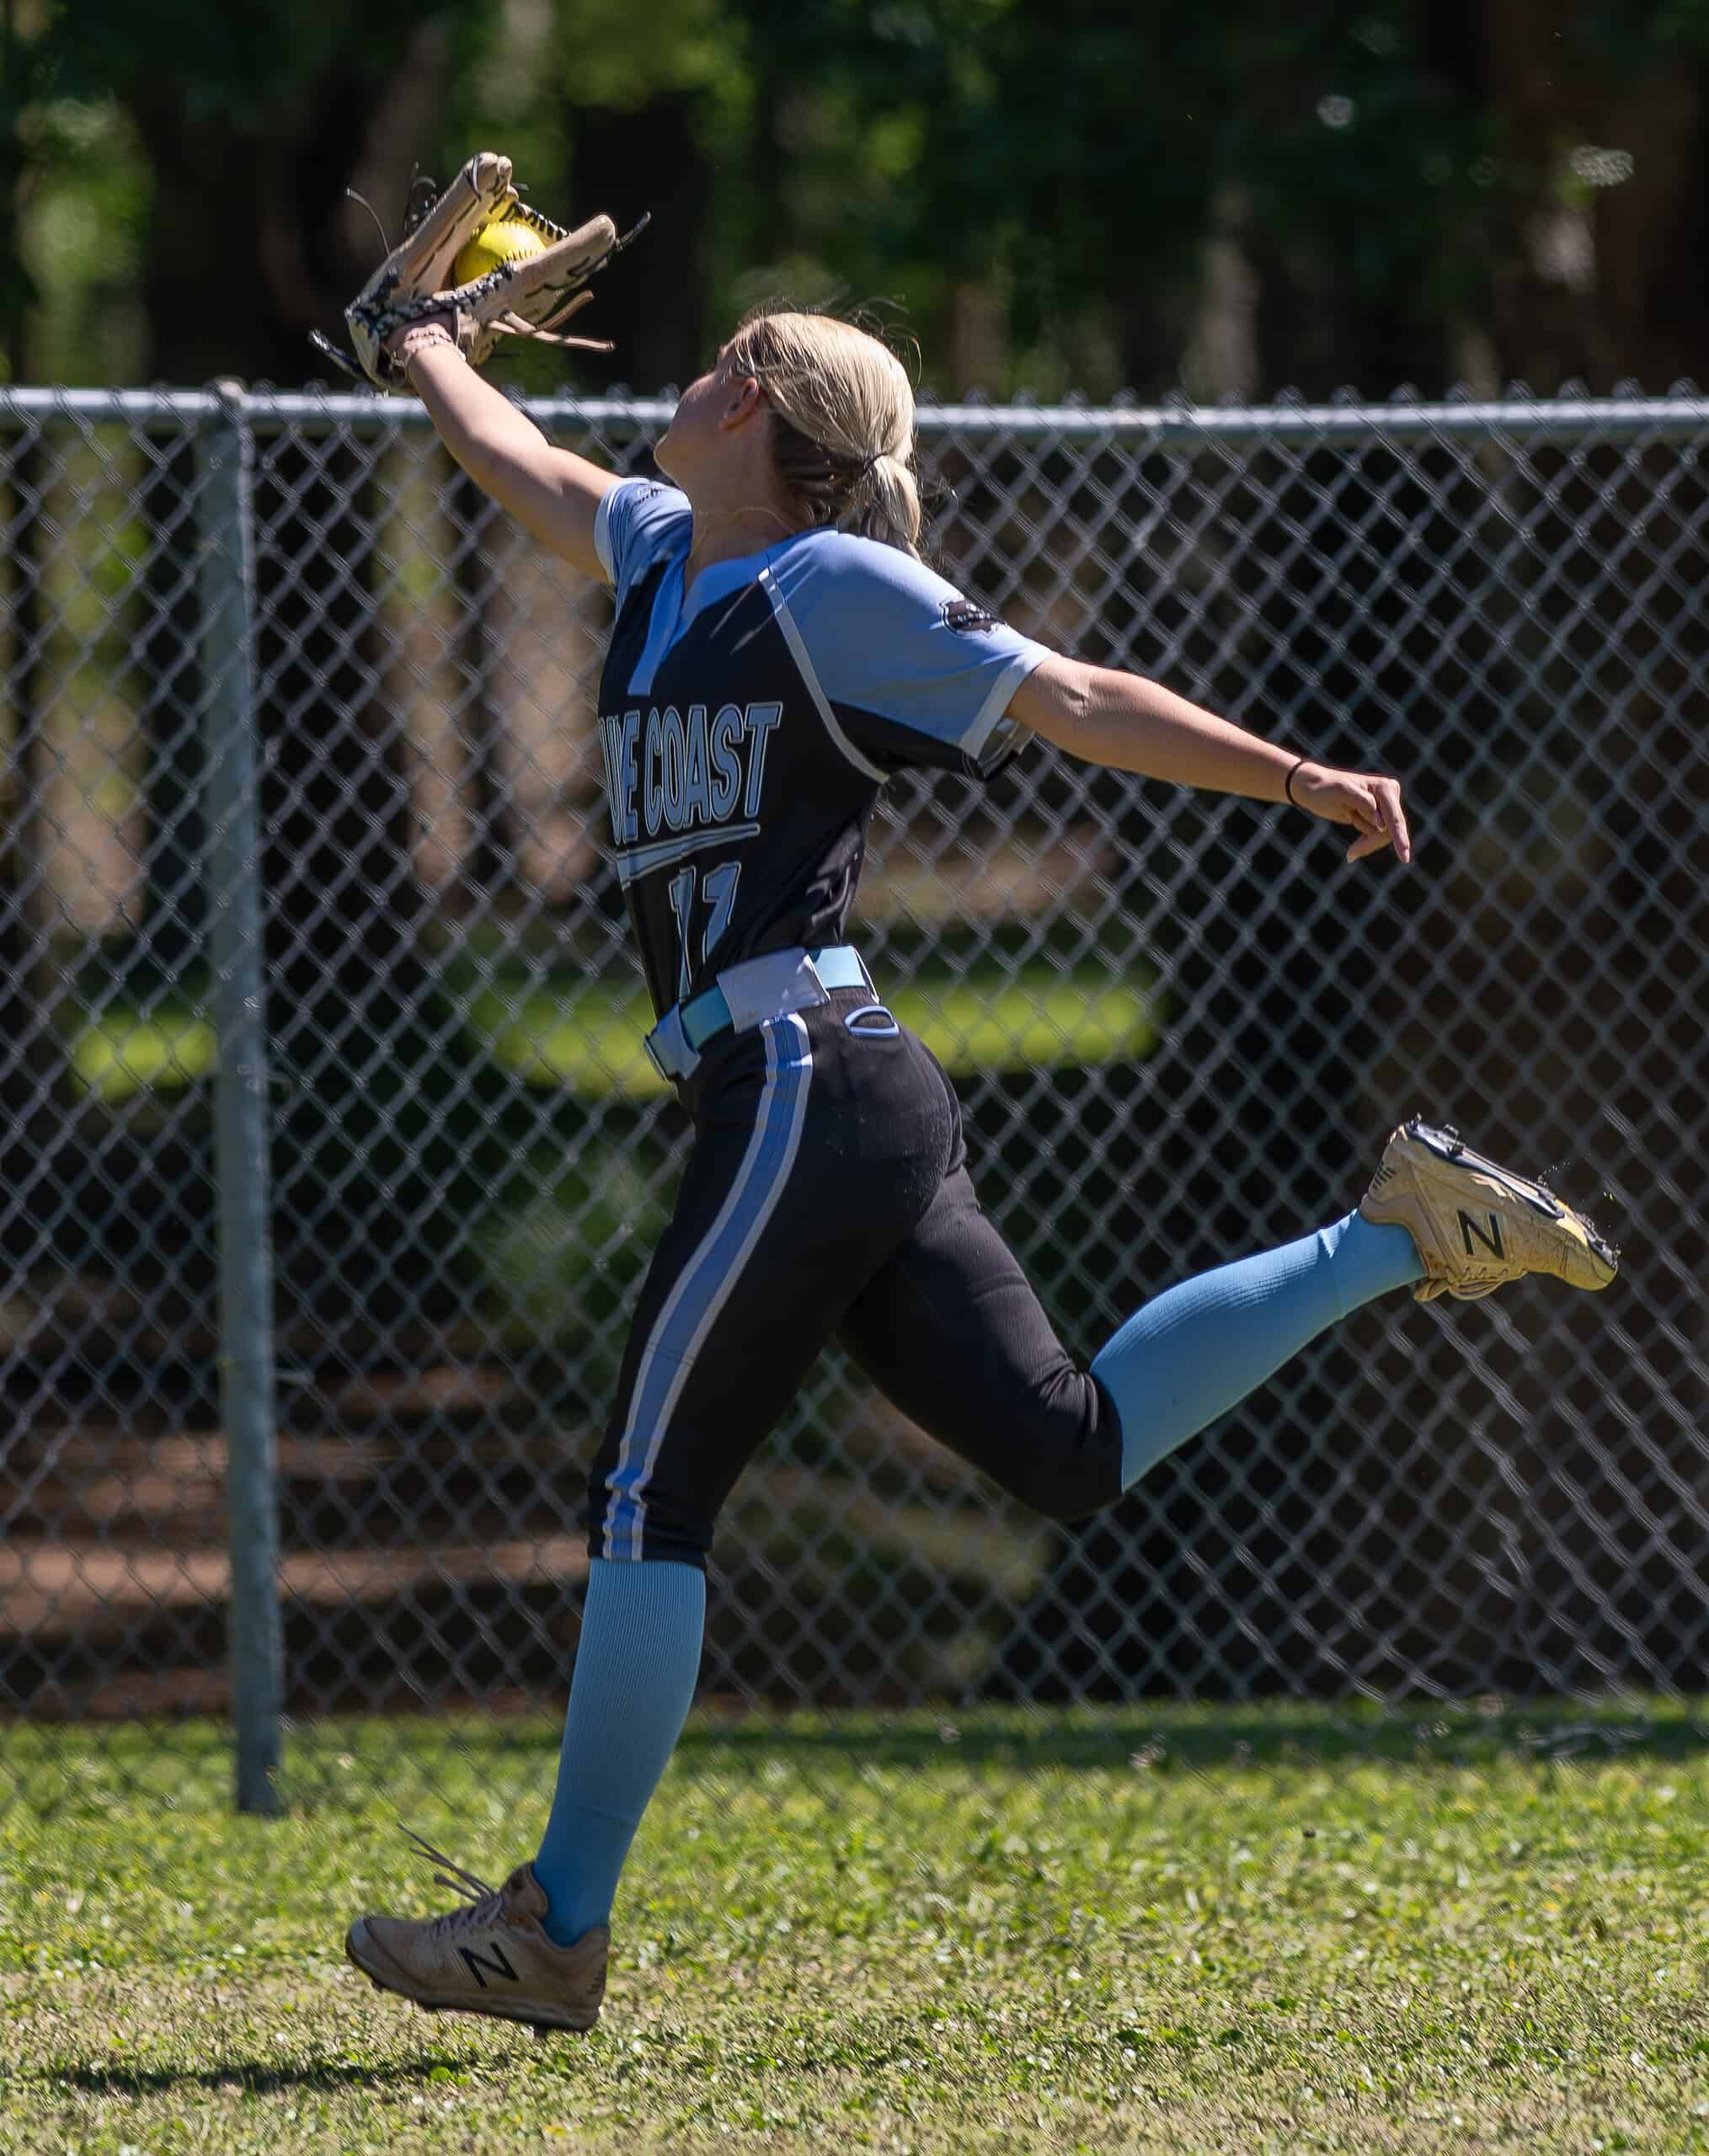 Nature Coast Tech centerfielder Kenzie Eland, 11, runs under a deep line drive in the Shark’s opening round extra inning loss to Cornerstone Charter Academy in the Leopard Slam tournament at Tom Varn Park. [Photo by Joe DiCristofalo]